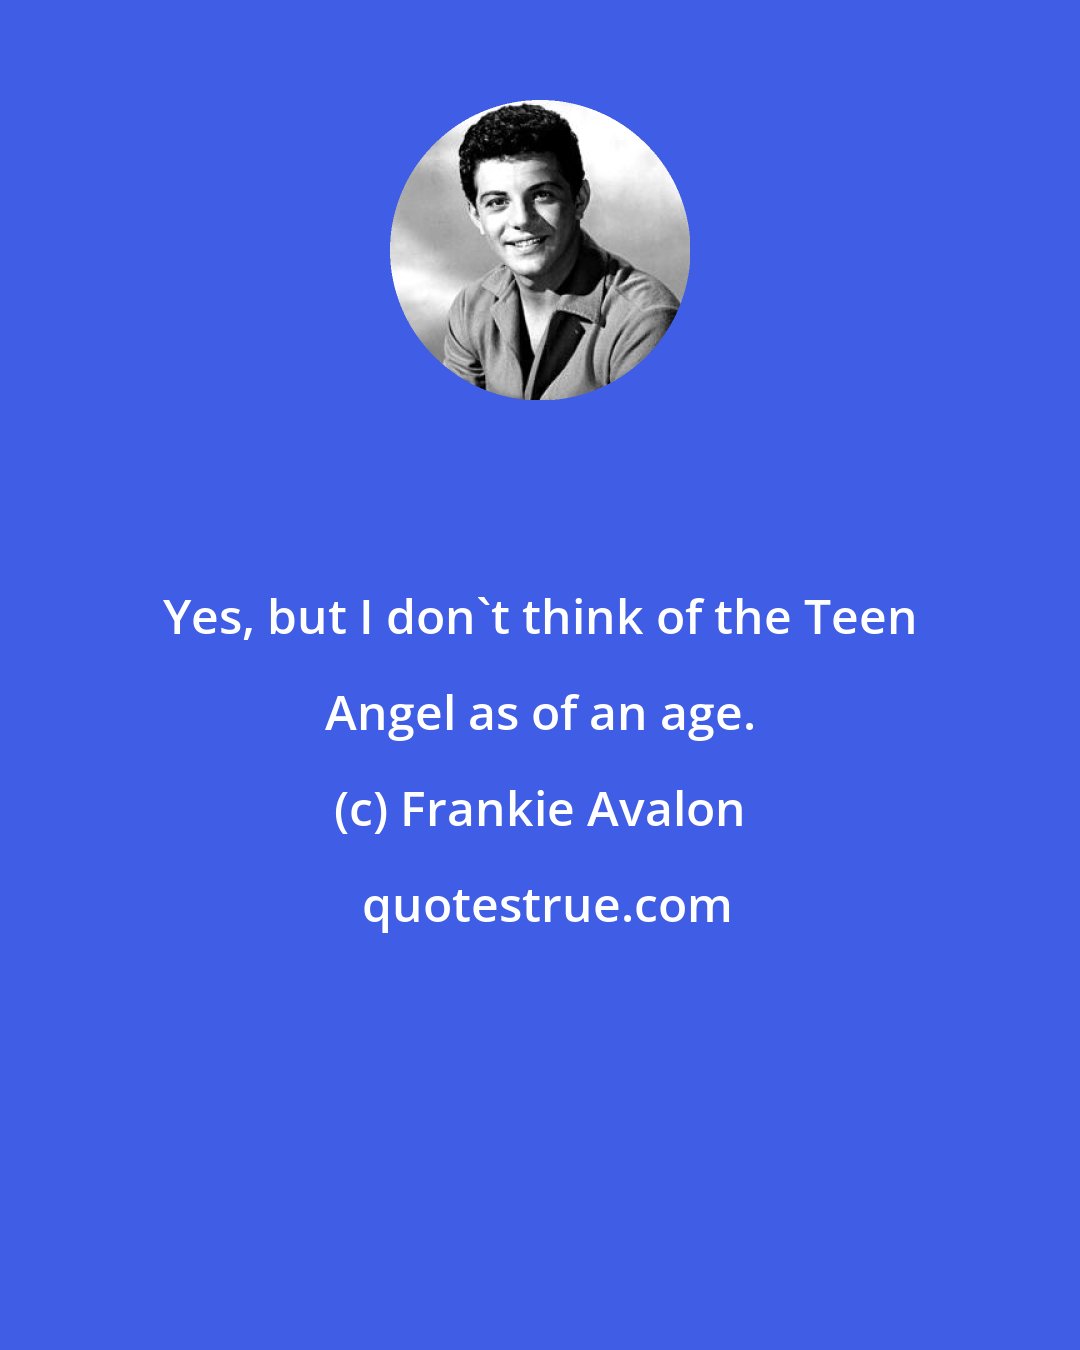 Frankie Avalon: Yes, but I don't think of the Teen Angel as of an age.